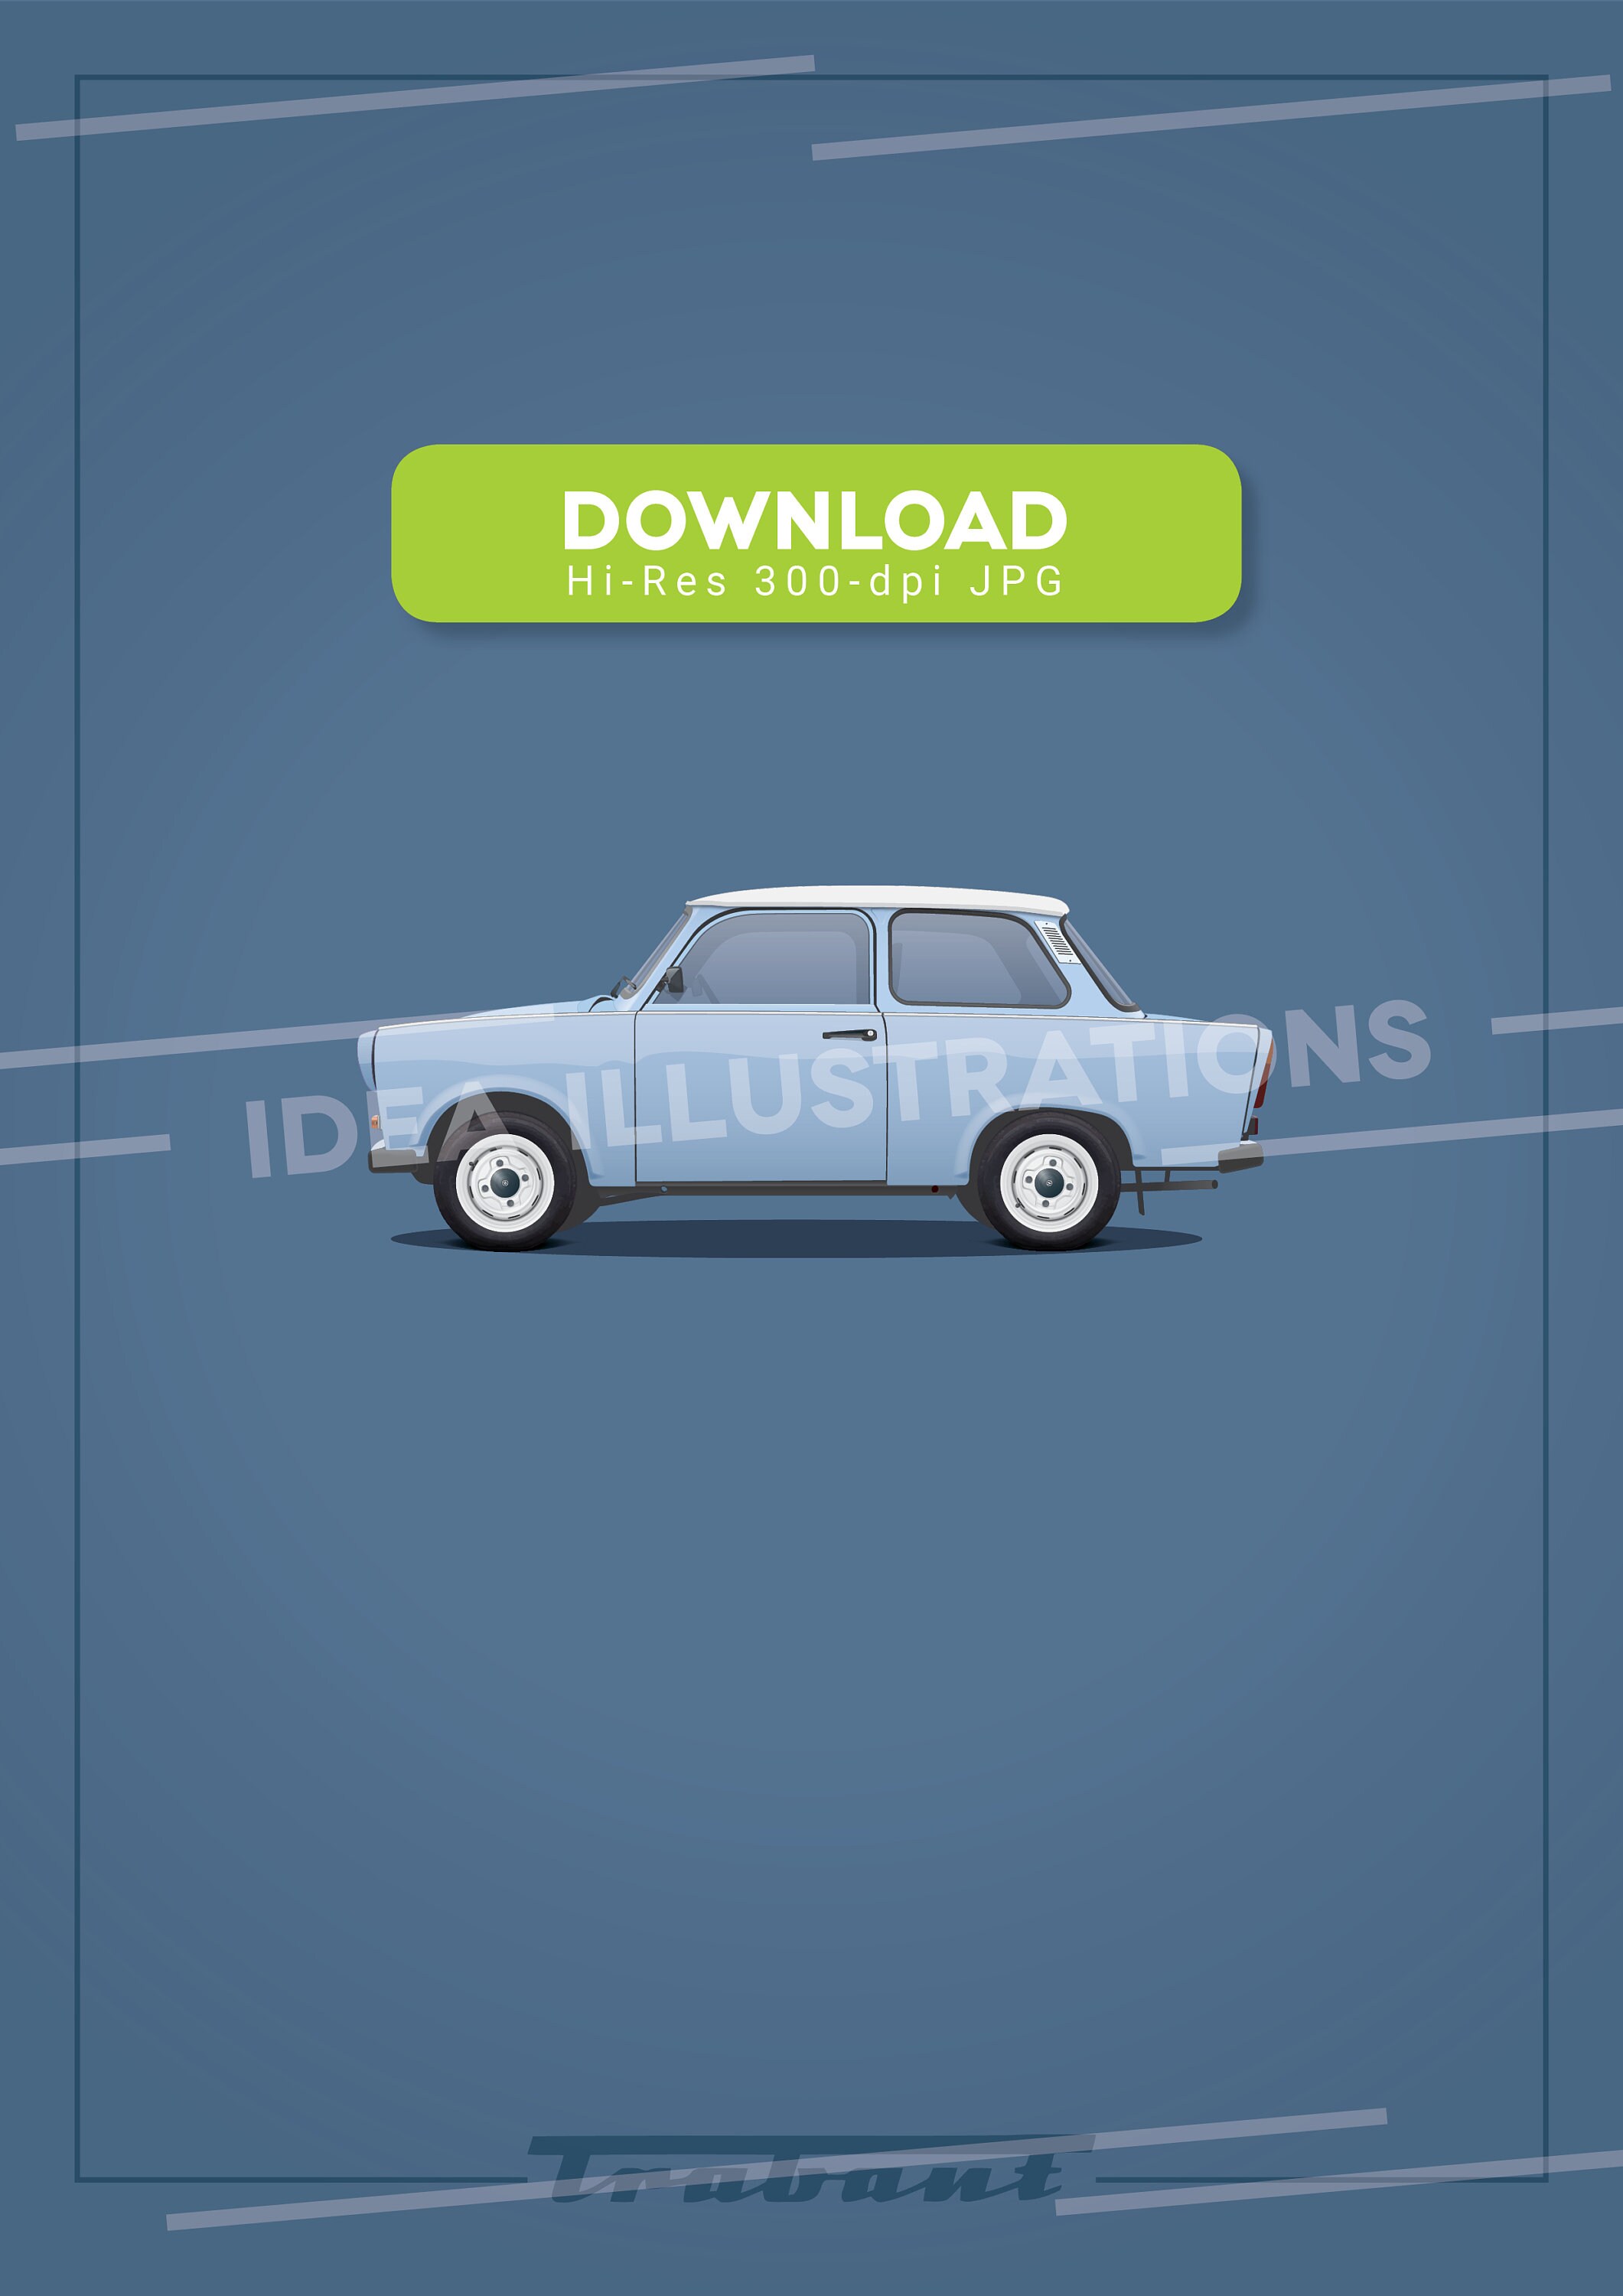 Trabant 601 Sticker for Sale by CoolCarVideos